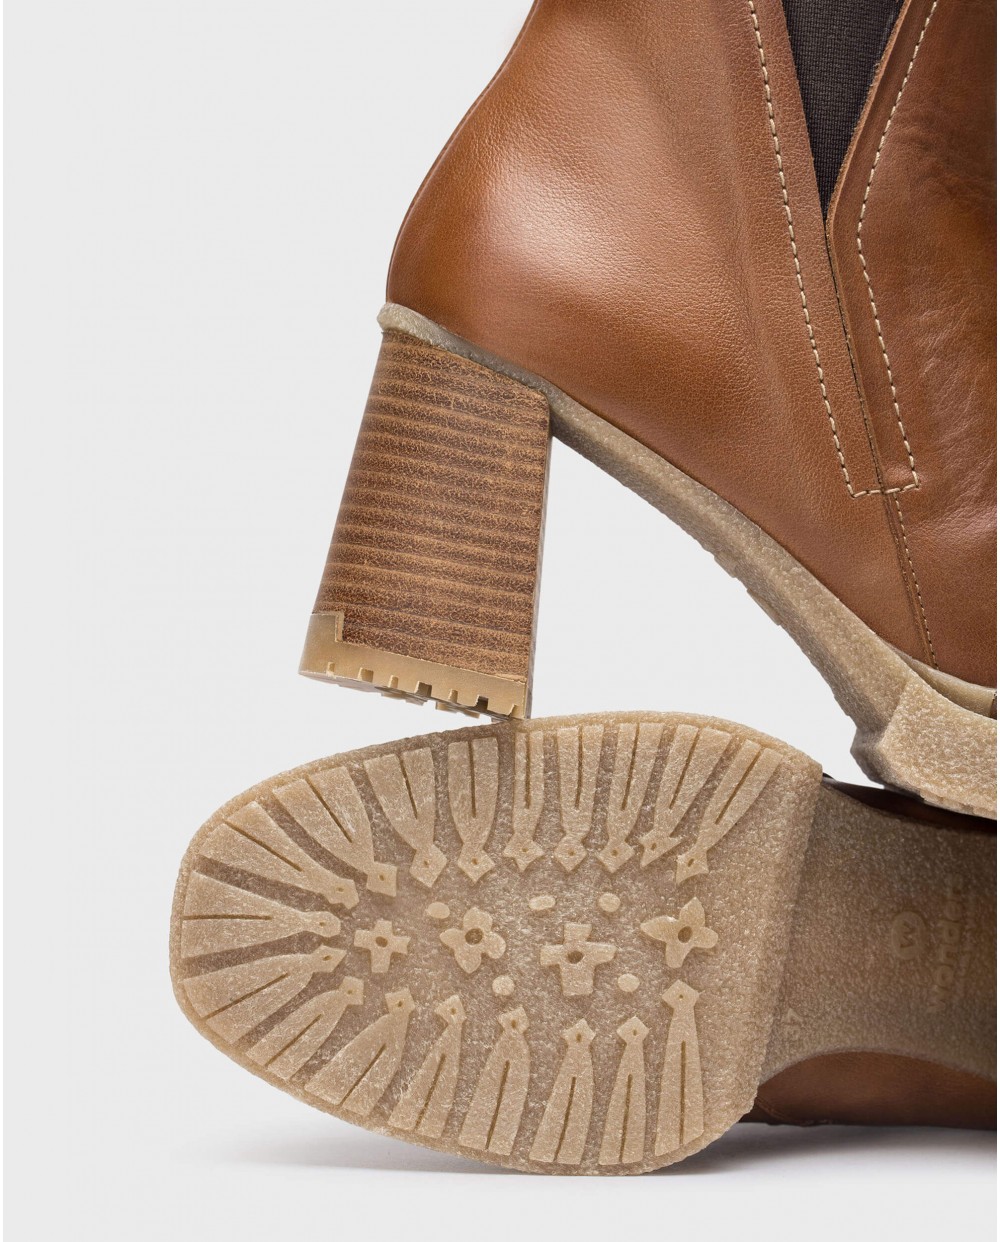 Wonders-Ankle Boots-Brown MIERA ankle boot